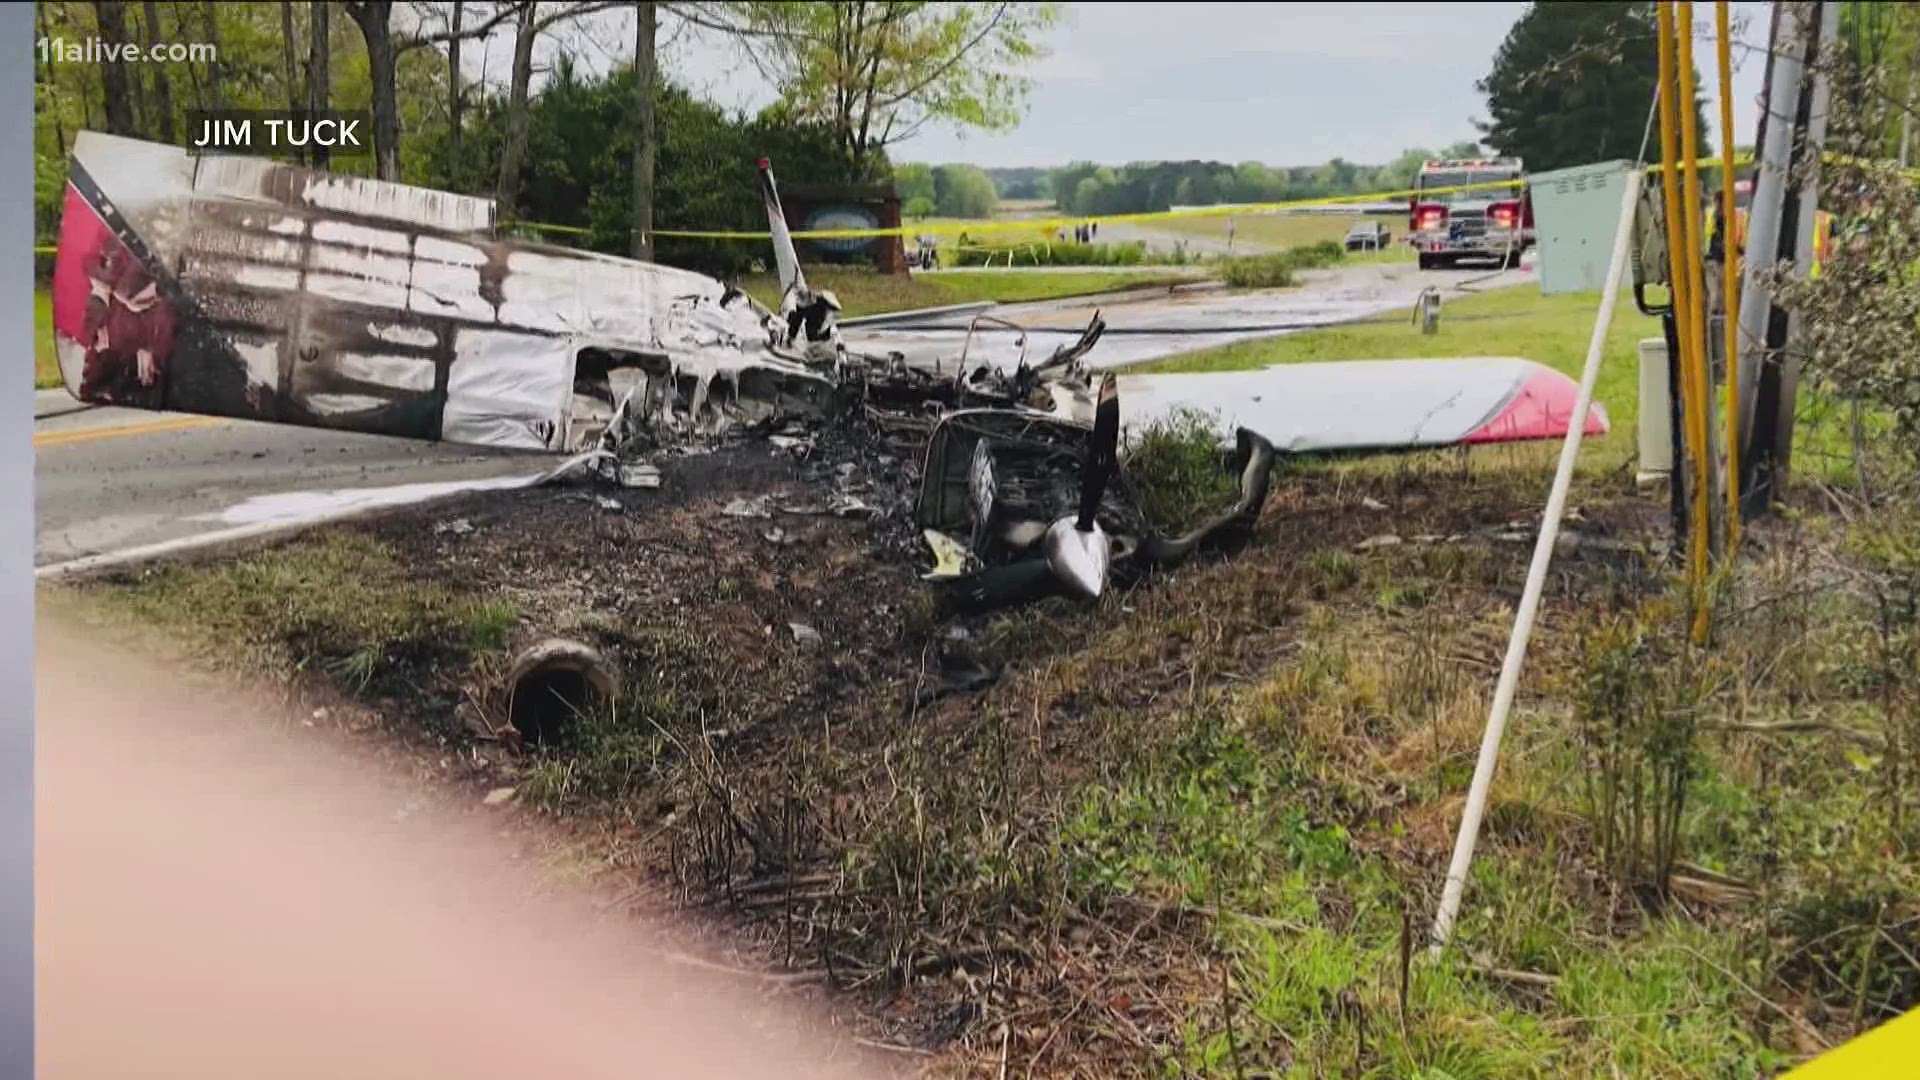 Three people survived a plane crash Friday in Henry County, according to authorities.